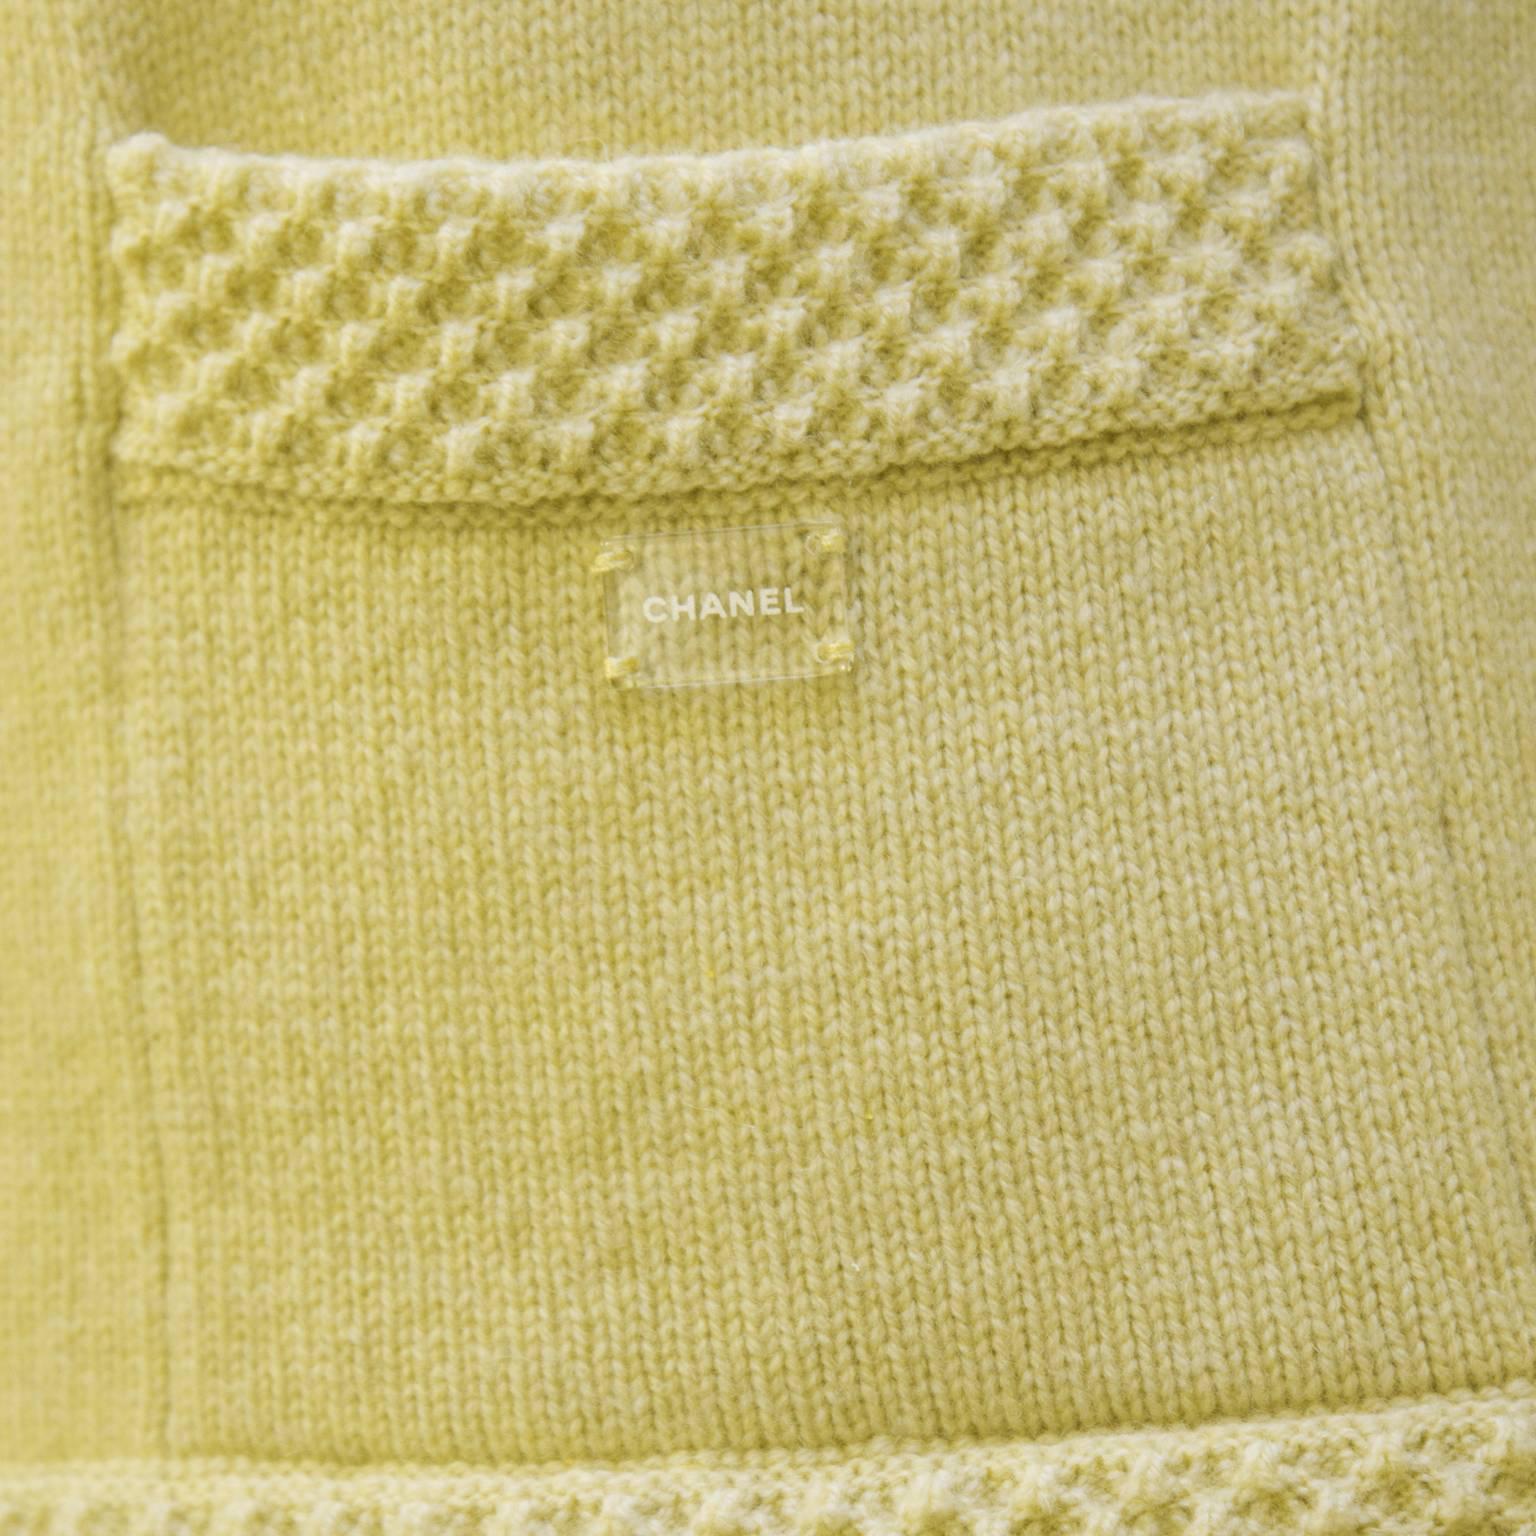 Women's Spring 2005 Chanel  Butter Yellow Cashmere Cardigan